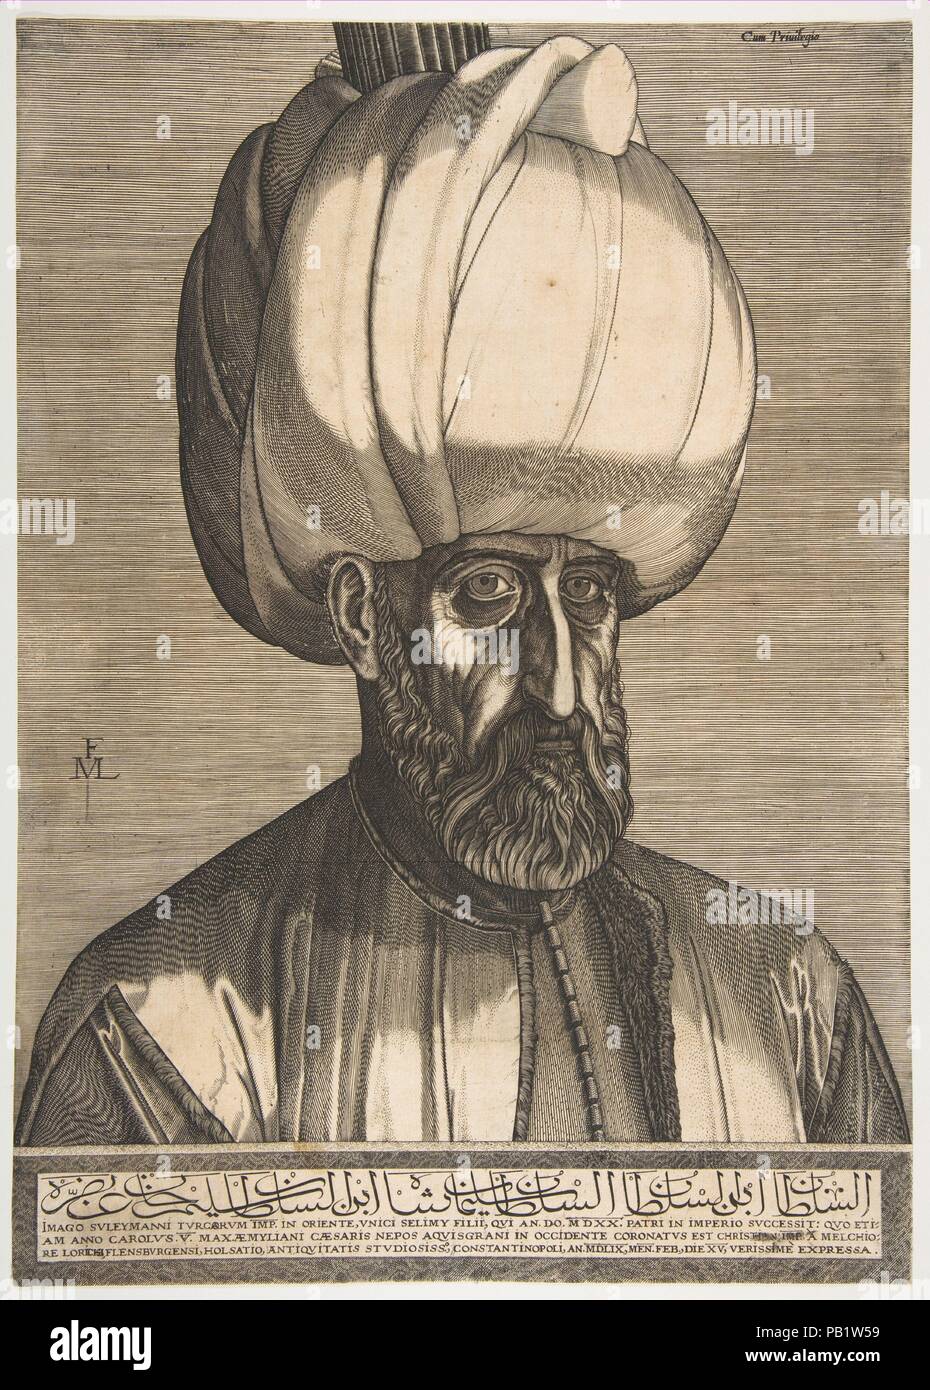 Süleyman the Magnificent. Artist: Engraved by Melchior Lorck (Danish, Flensburg 1526-after 1588 Hamburg (?)). Dimensions: Sheet: 15 7/8 x 11 1/4 in. (40.4 x 28.6 cm). Date: 16th century. Museum: Metropolitan Museum of Art, New York, USA. Stock Photo